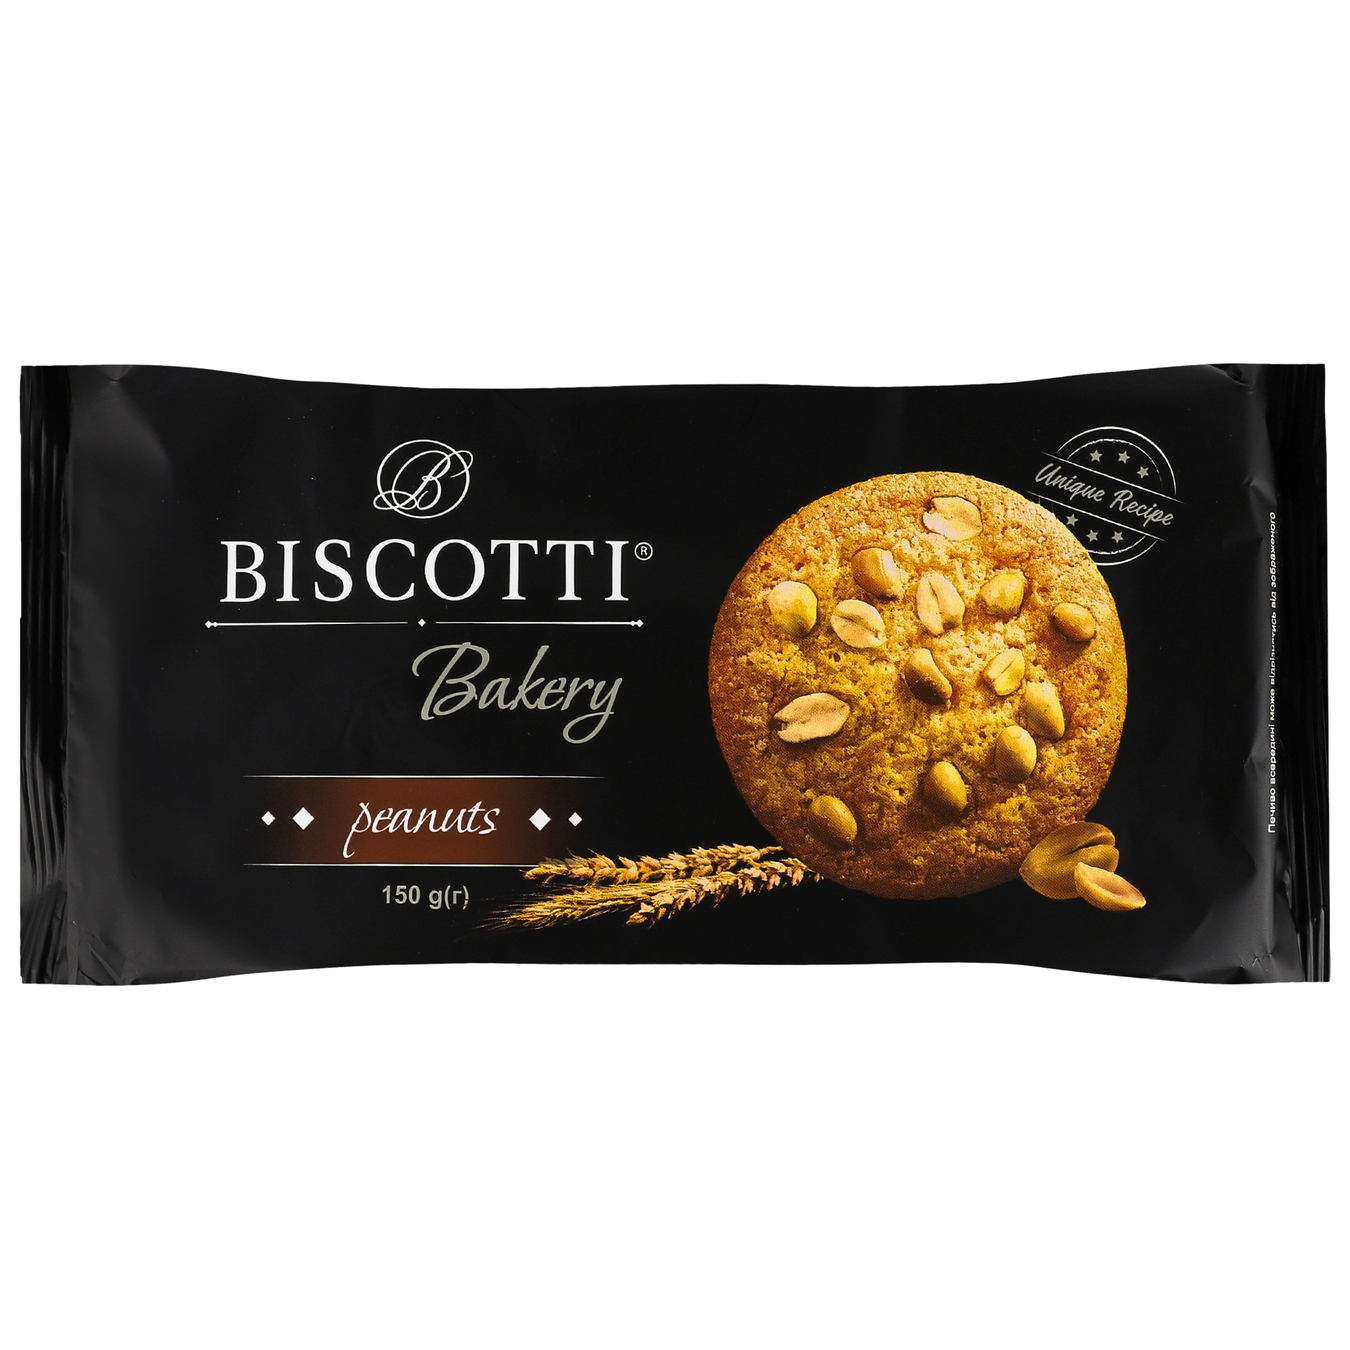 BISCOTTI Bakery cookies with peanuts 150g